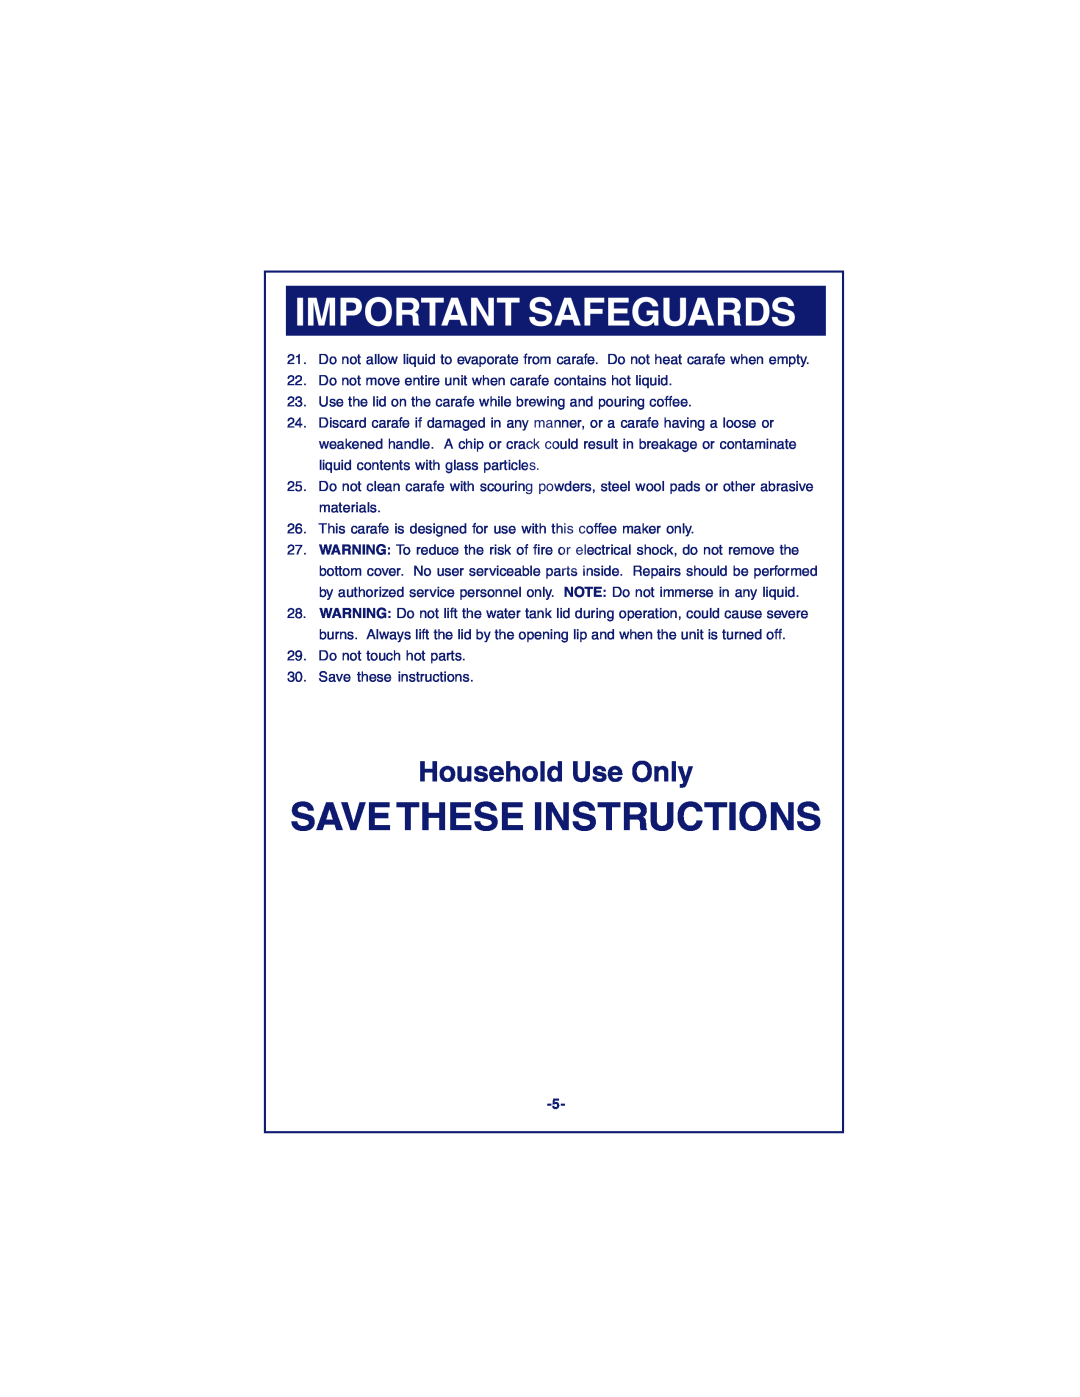 DeLonghi DC89TTC Series, DC87T Series instruction manual Important Safeguards, Savethese Instructions, Household Use Only 